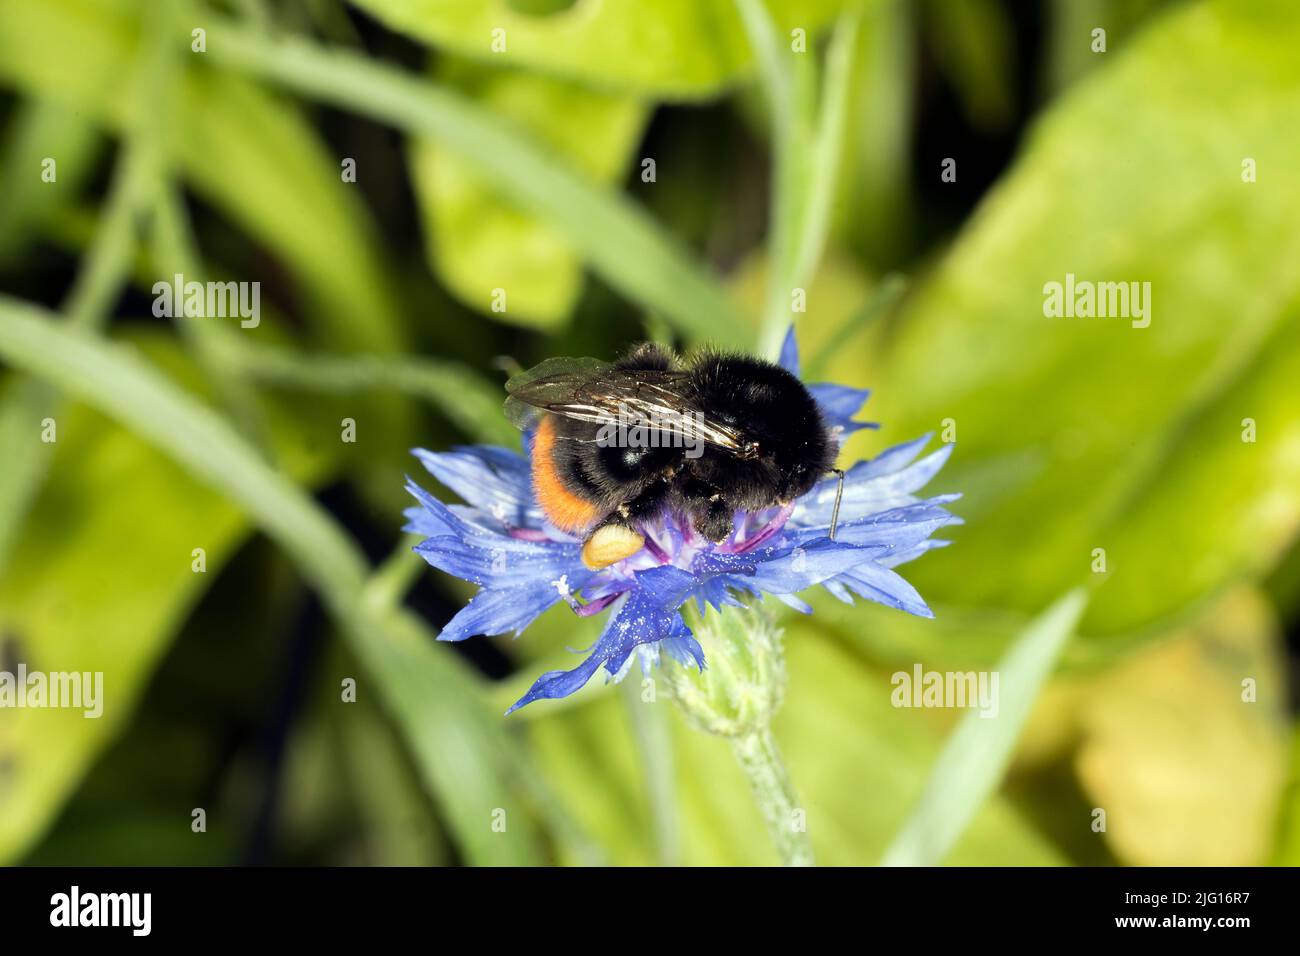 Bumblebee on a flower meadow Stock Photo